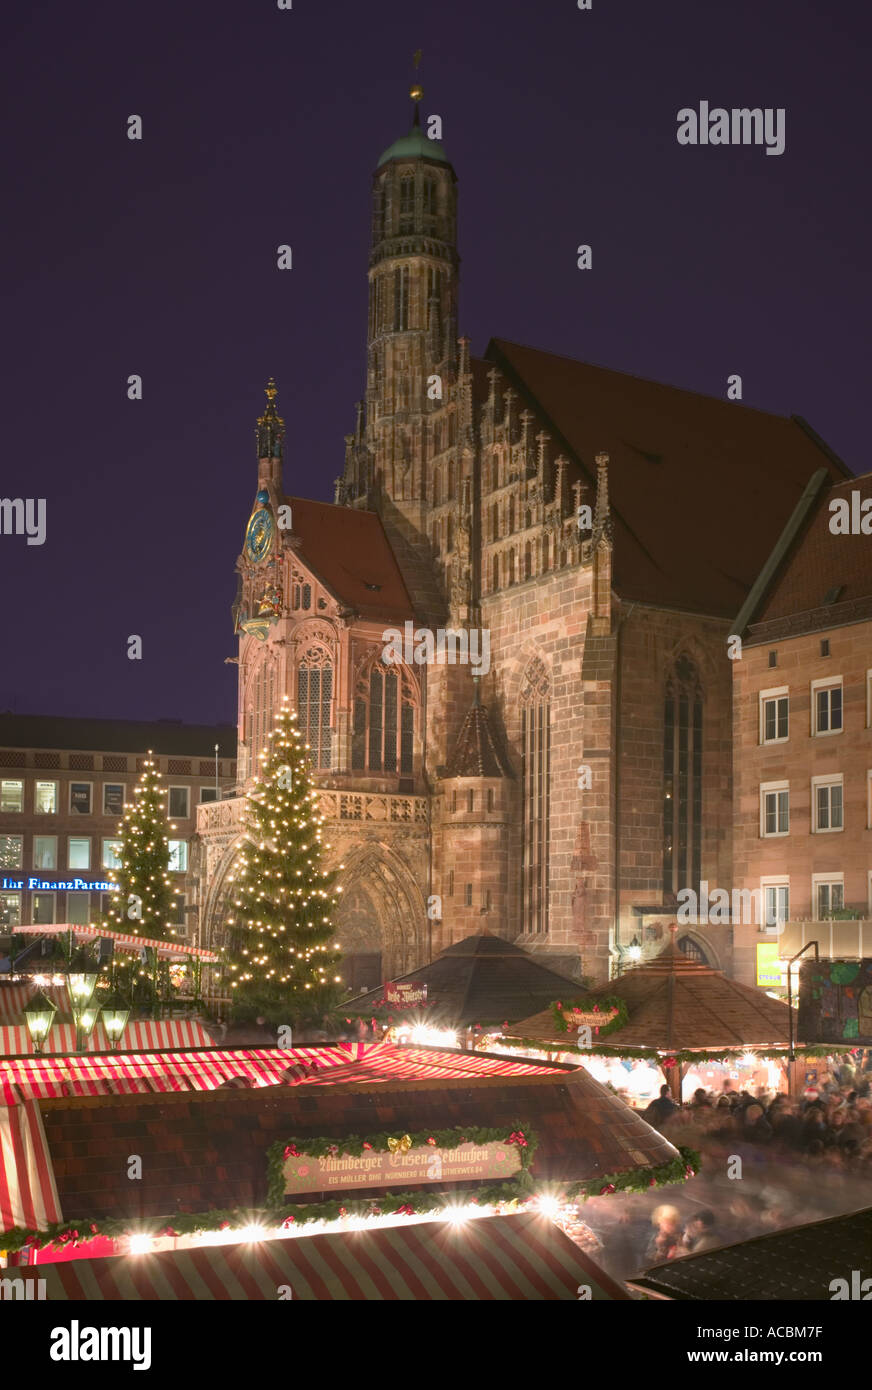 The Christmas Market in Hauptmarkt, Nuremberg with The Frauenkirche behind. Stock Photo